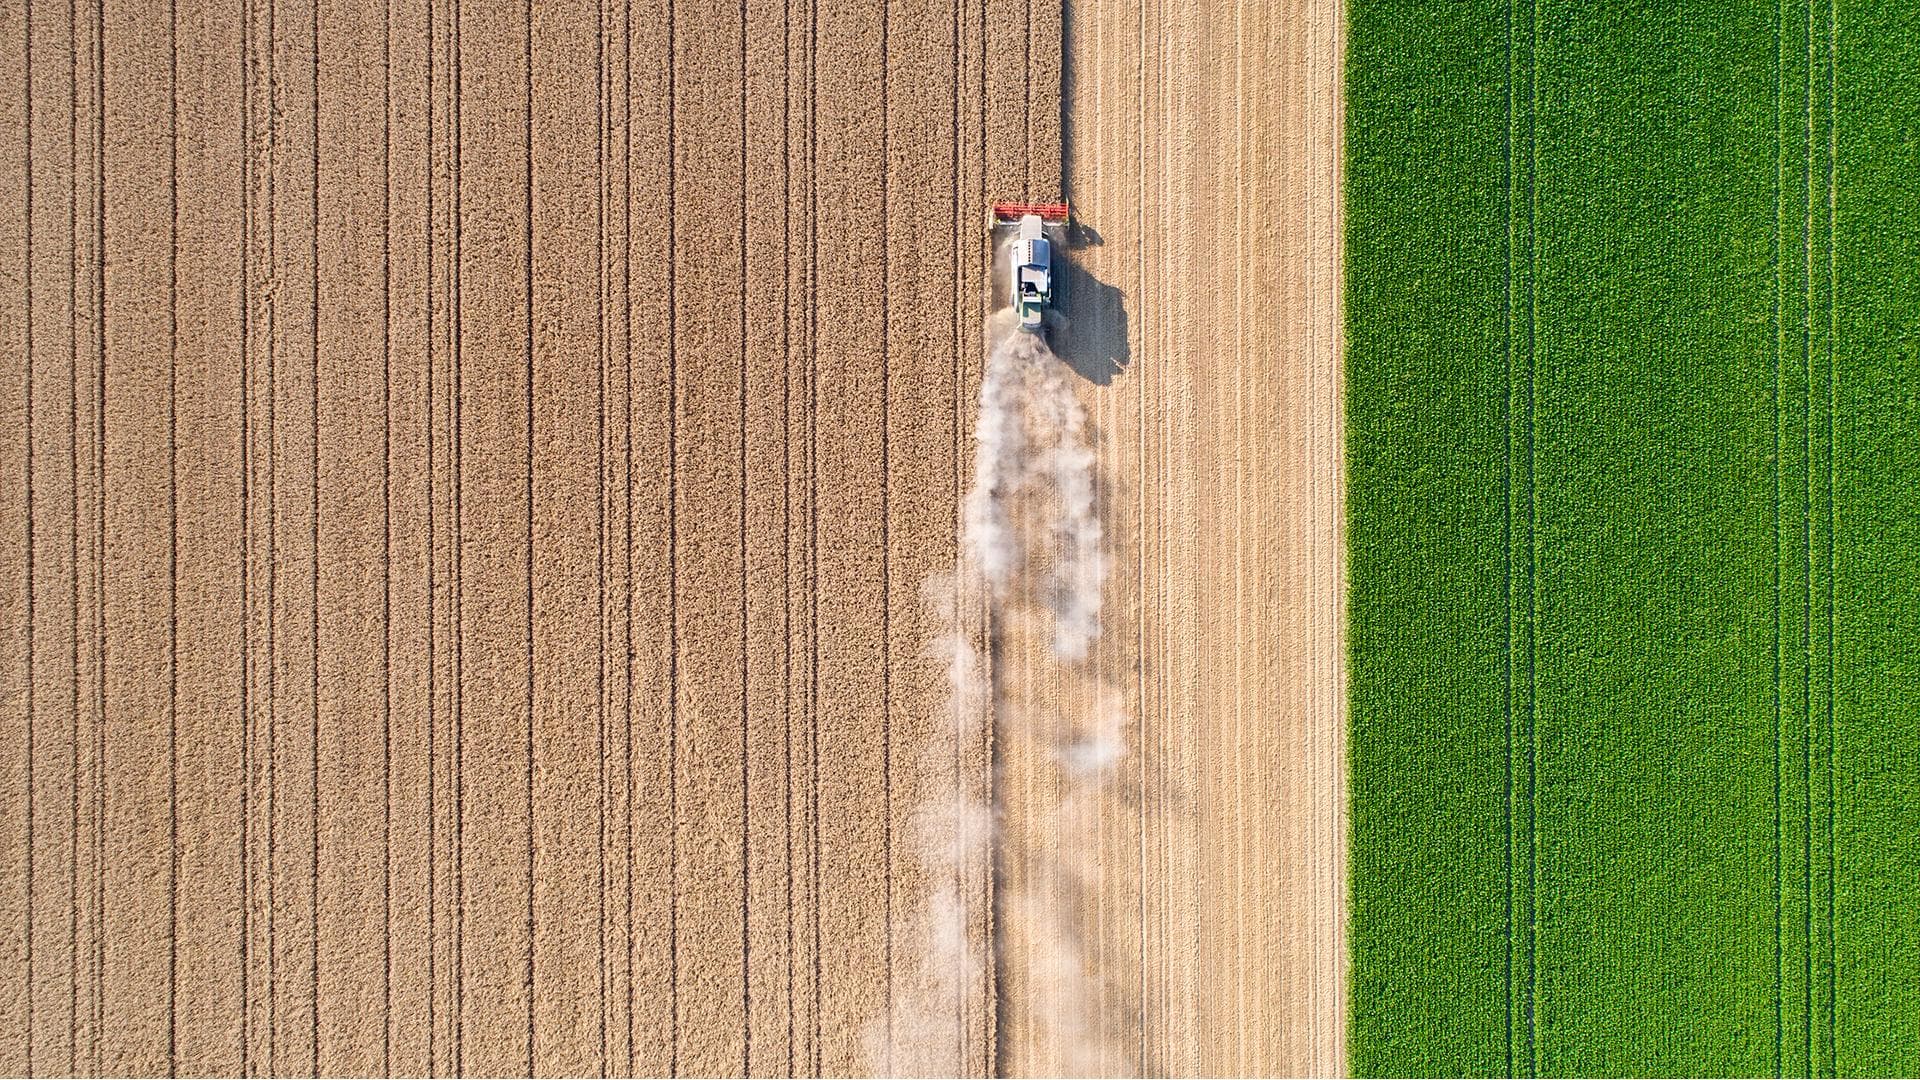 Aerial view of a tractor harvesting wheat fields.